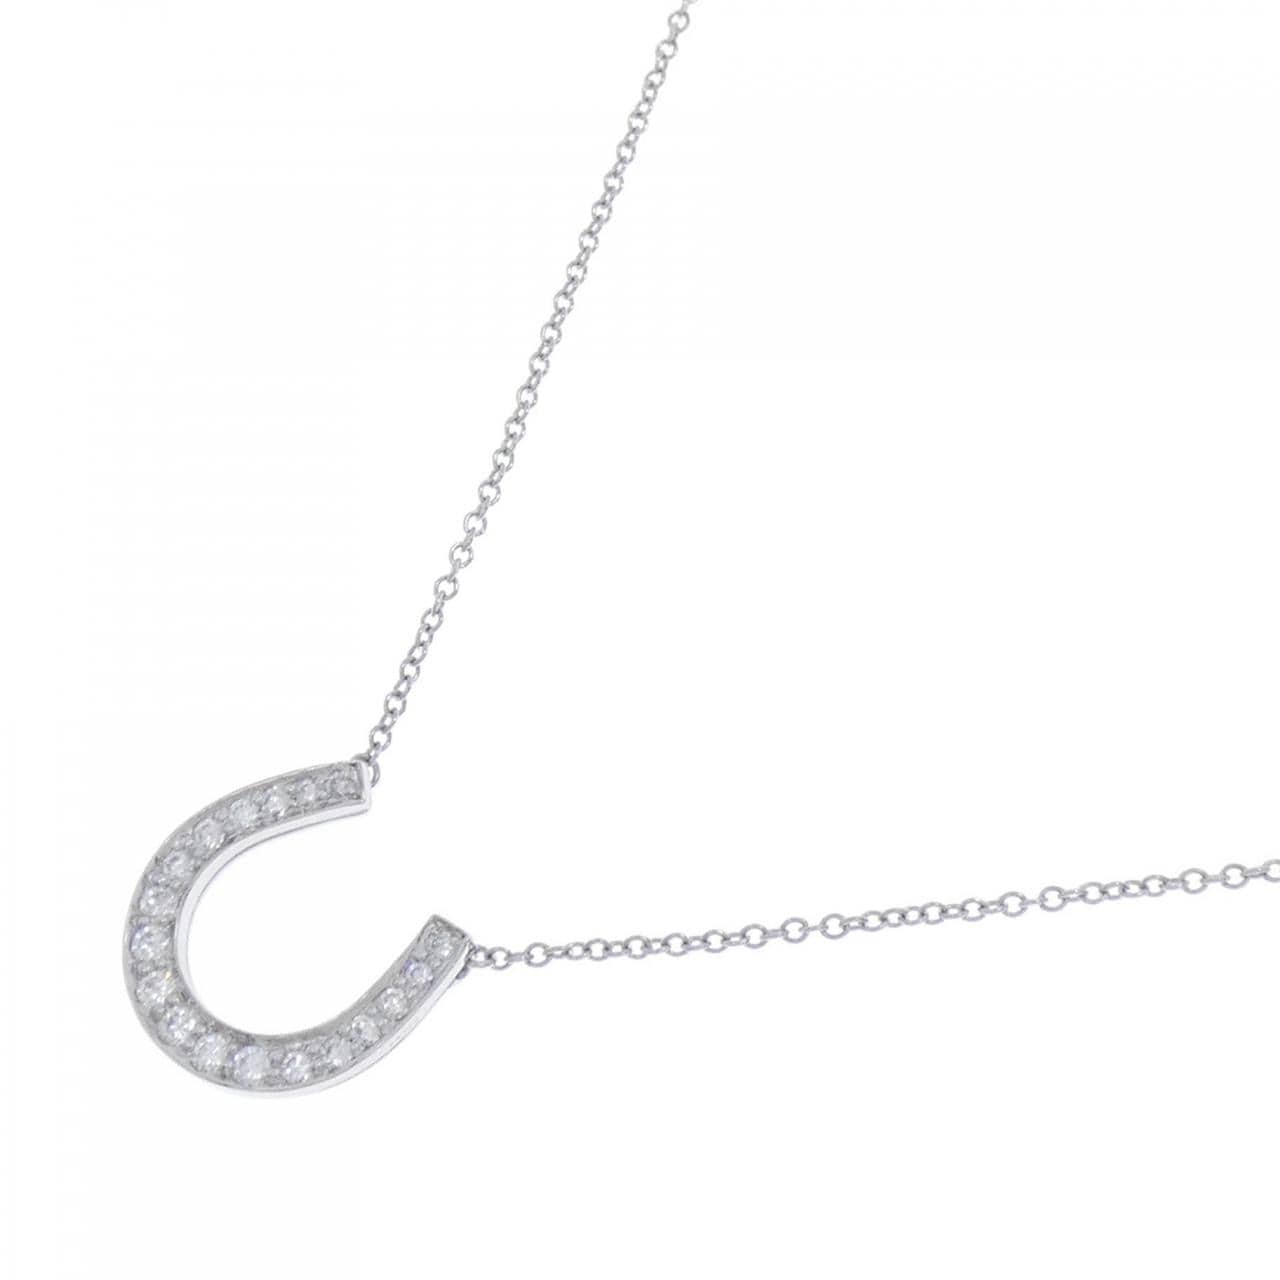 Authentic Tiffany & Co. Horseshoe Pendant Necklace in Sterling Silver - Etsy